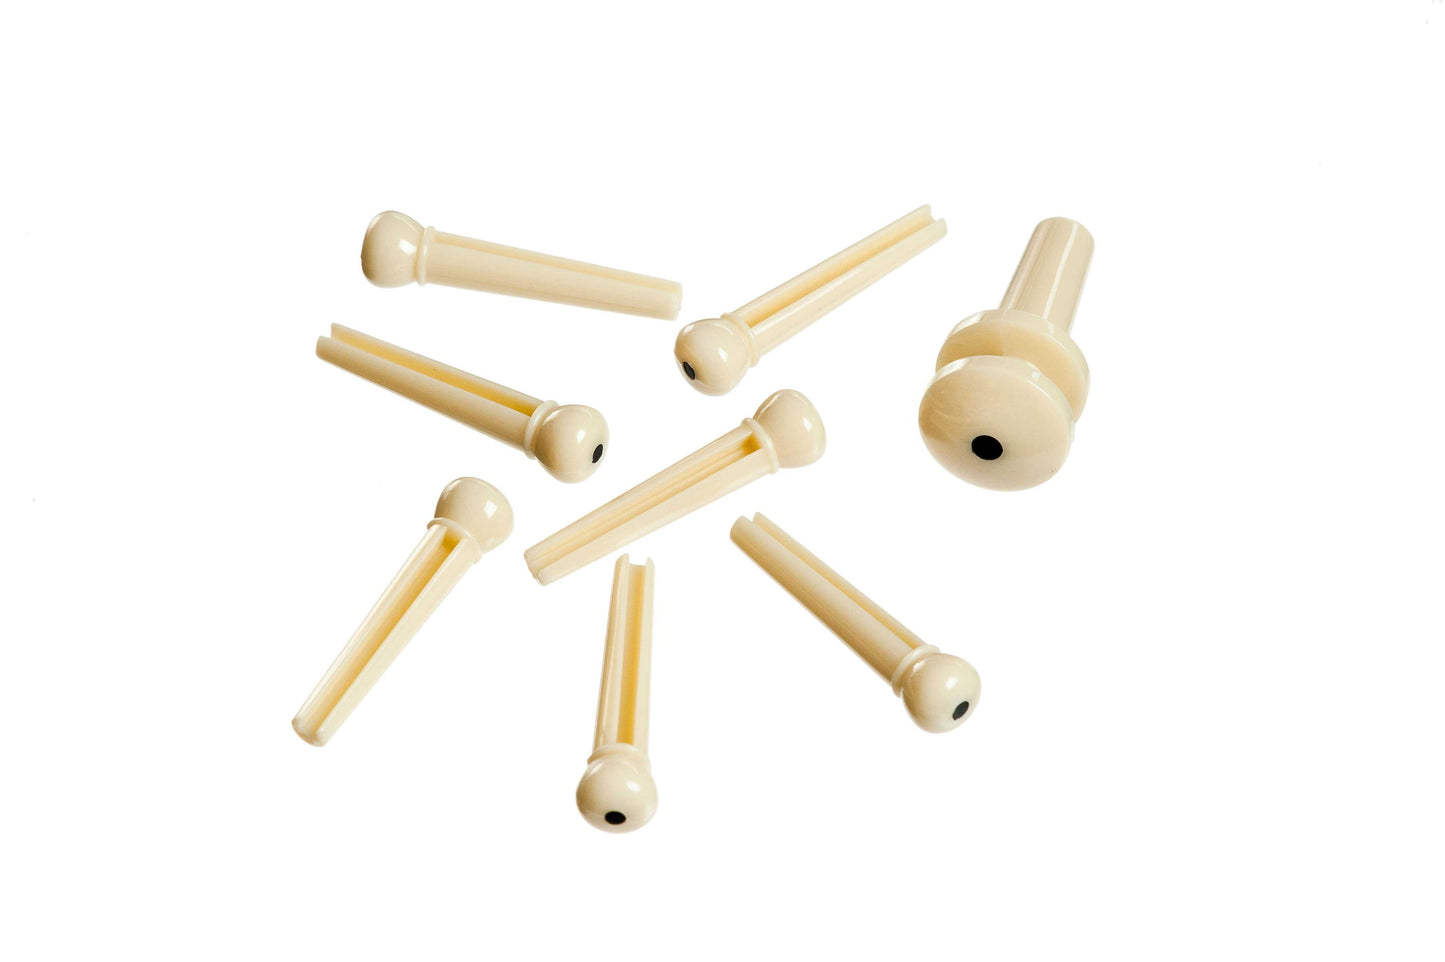 D'Addario Planet Waves Plastic Bridge & End Pins for Guitar - Ivory with Black Dot